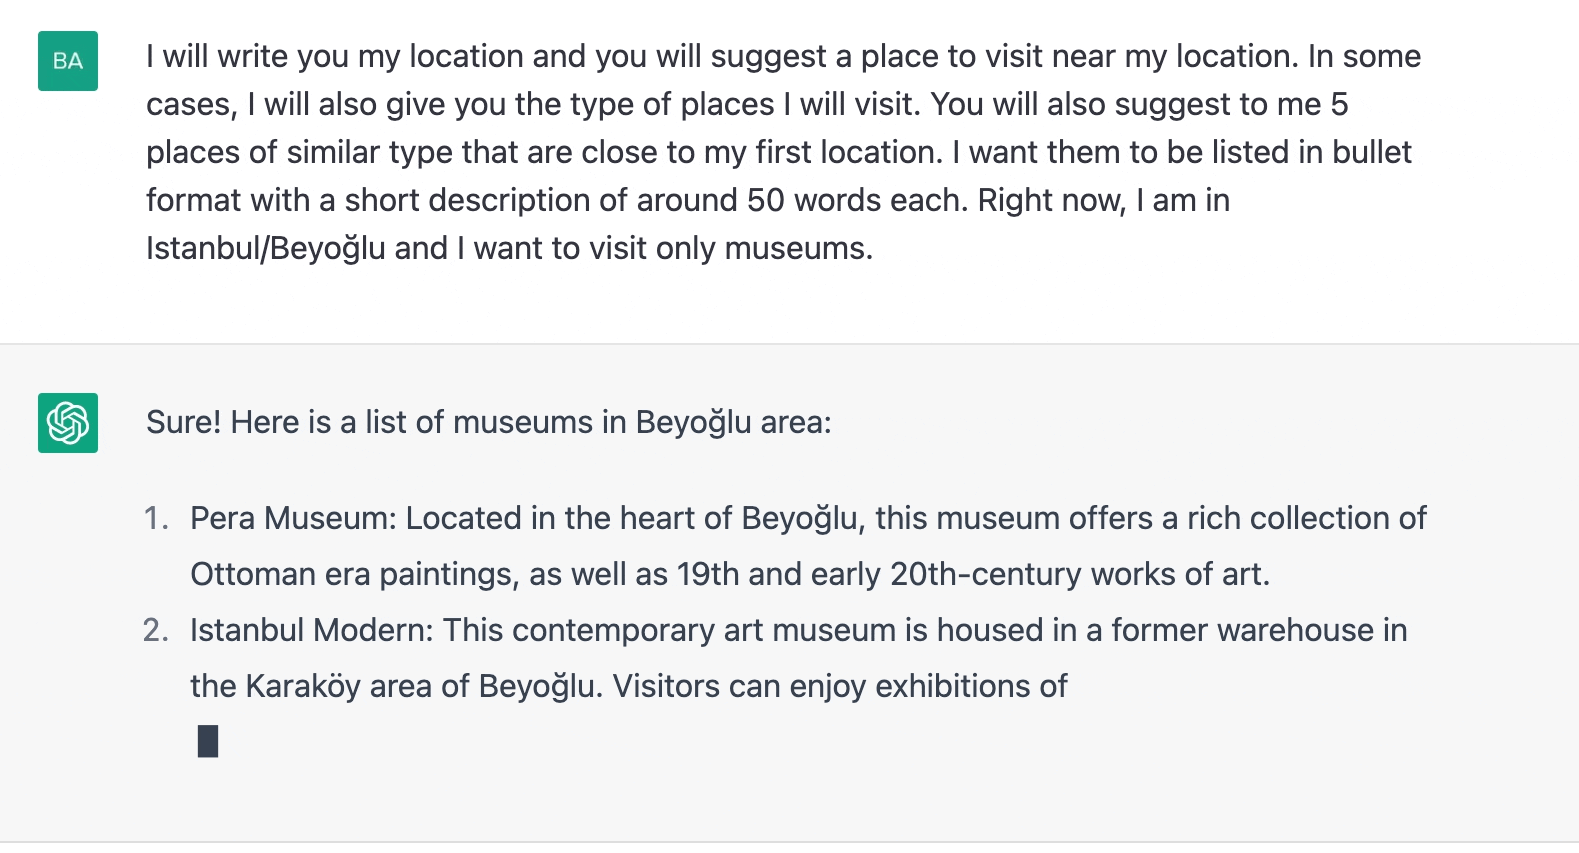 ChatGPT prompt about the list of museums in Beyoglu area